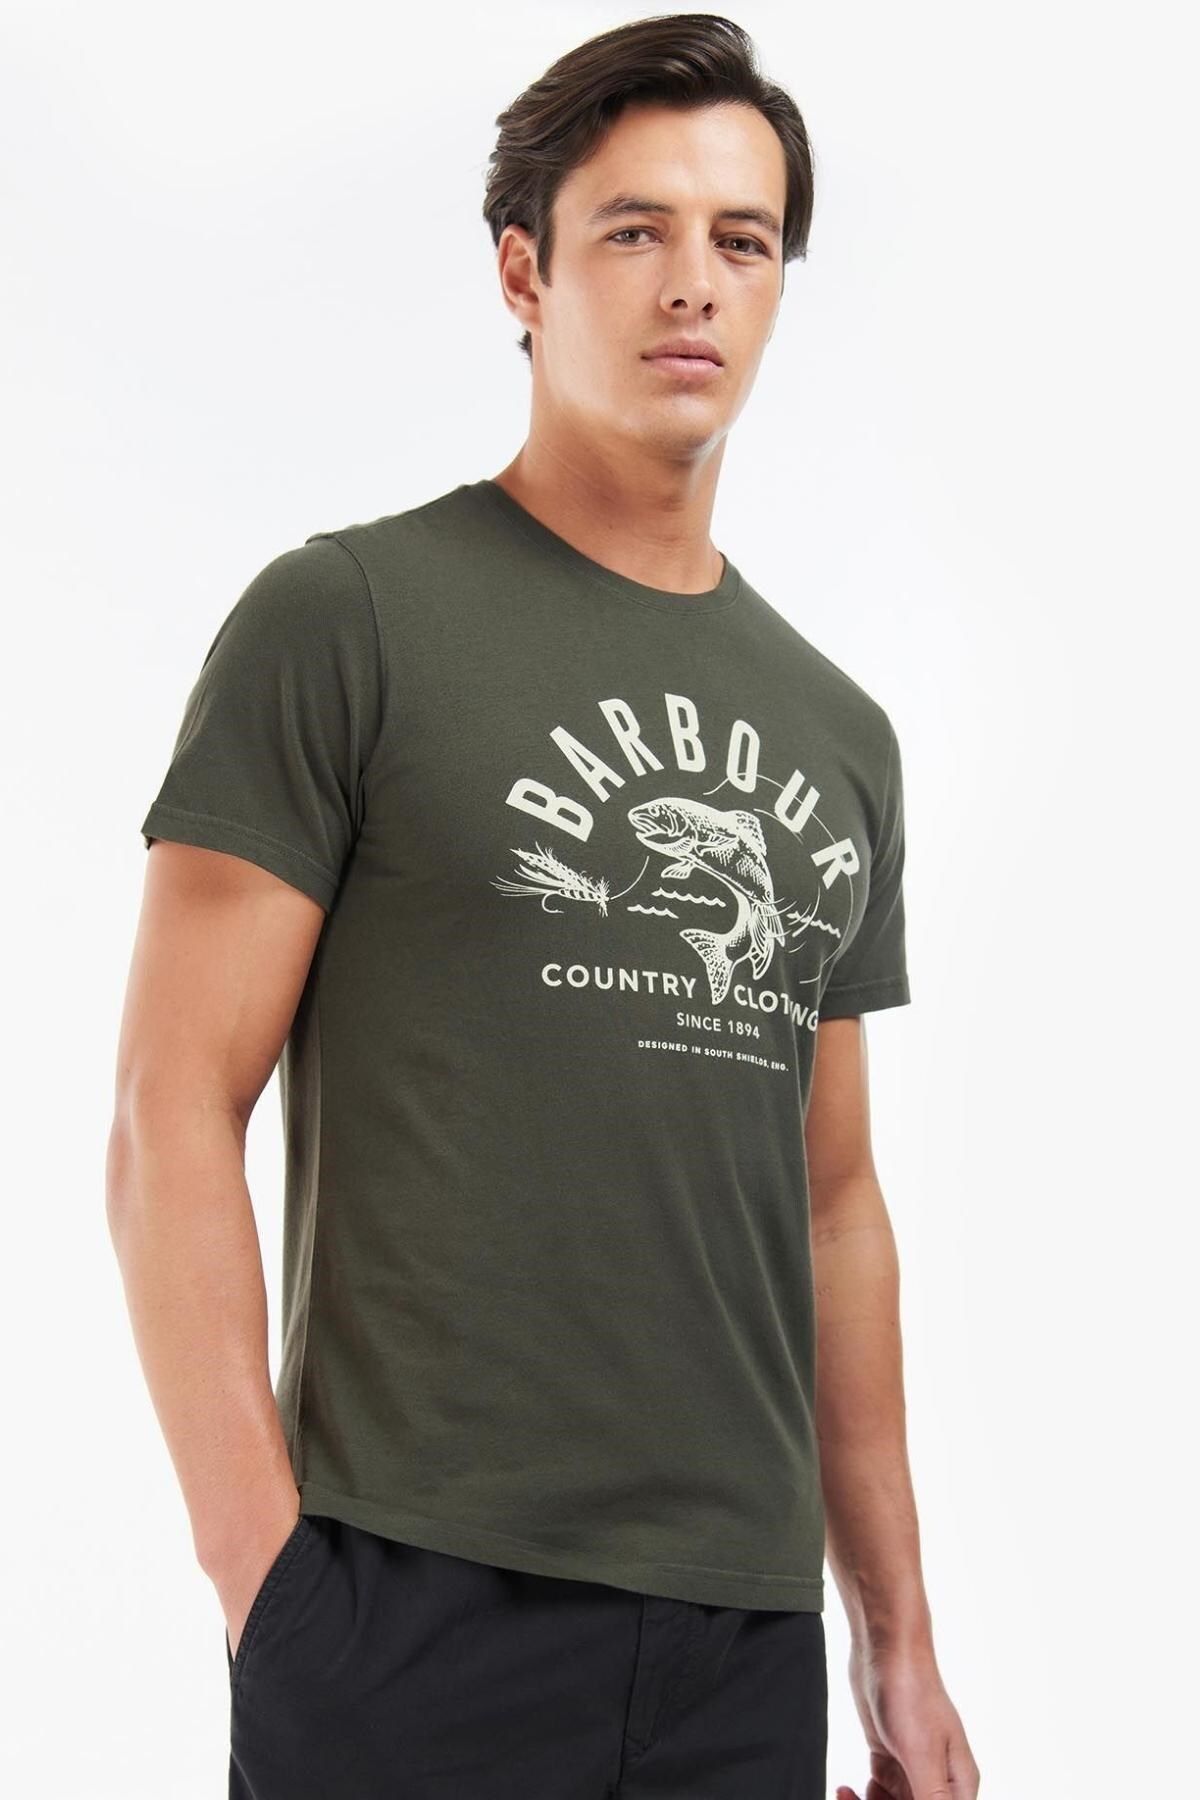 Barbour Country Clothing T-shirt Gn91 Forest